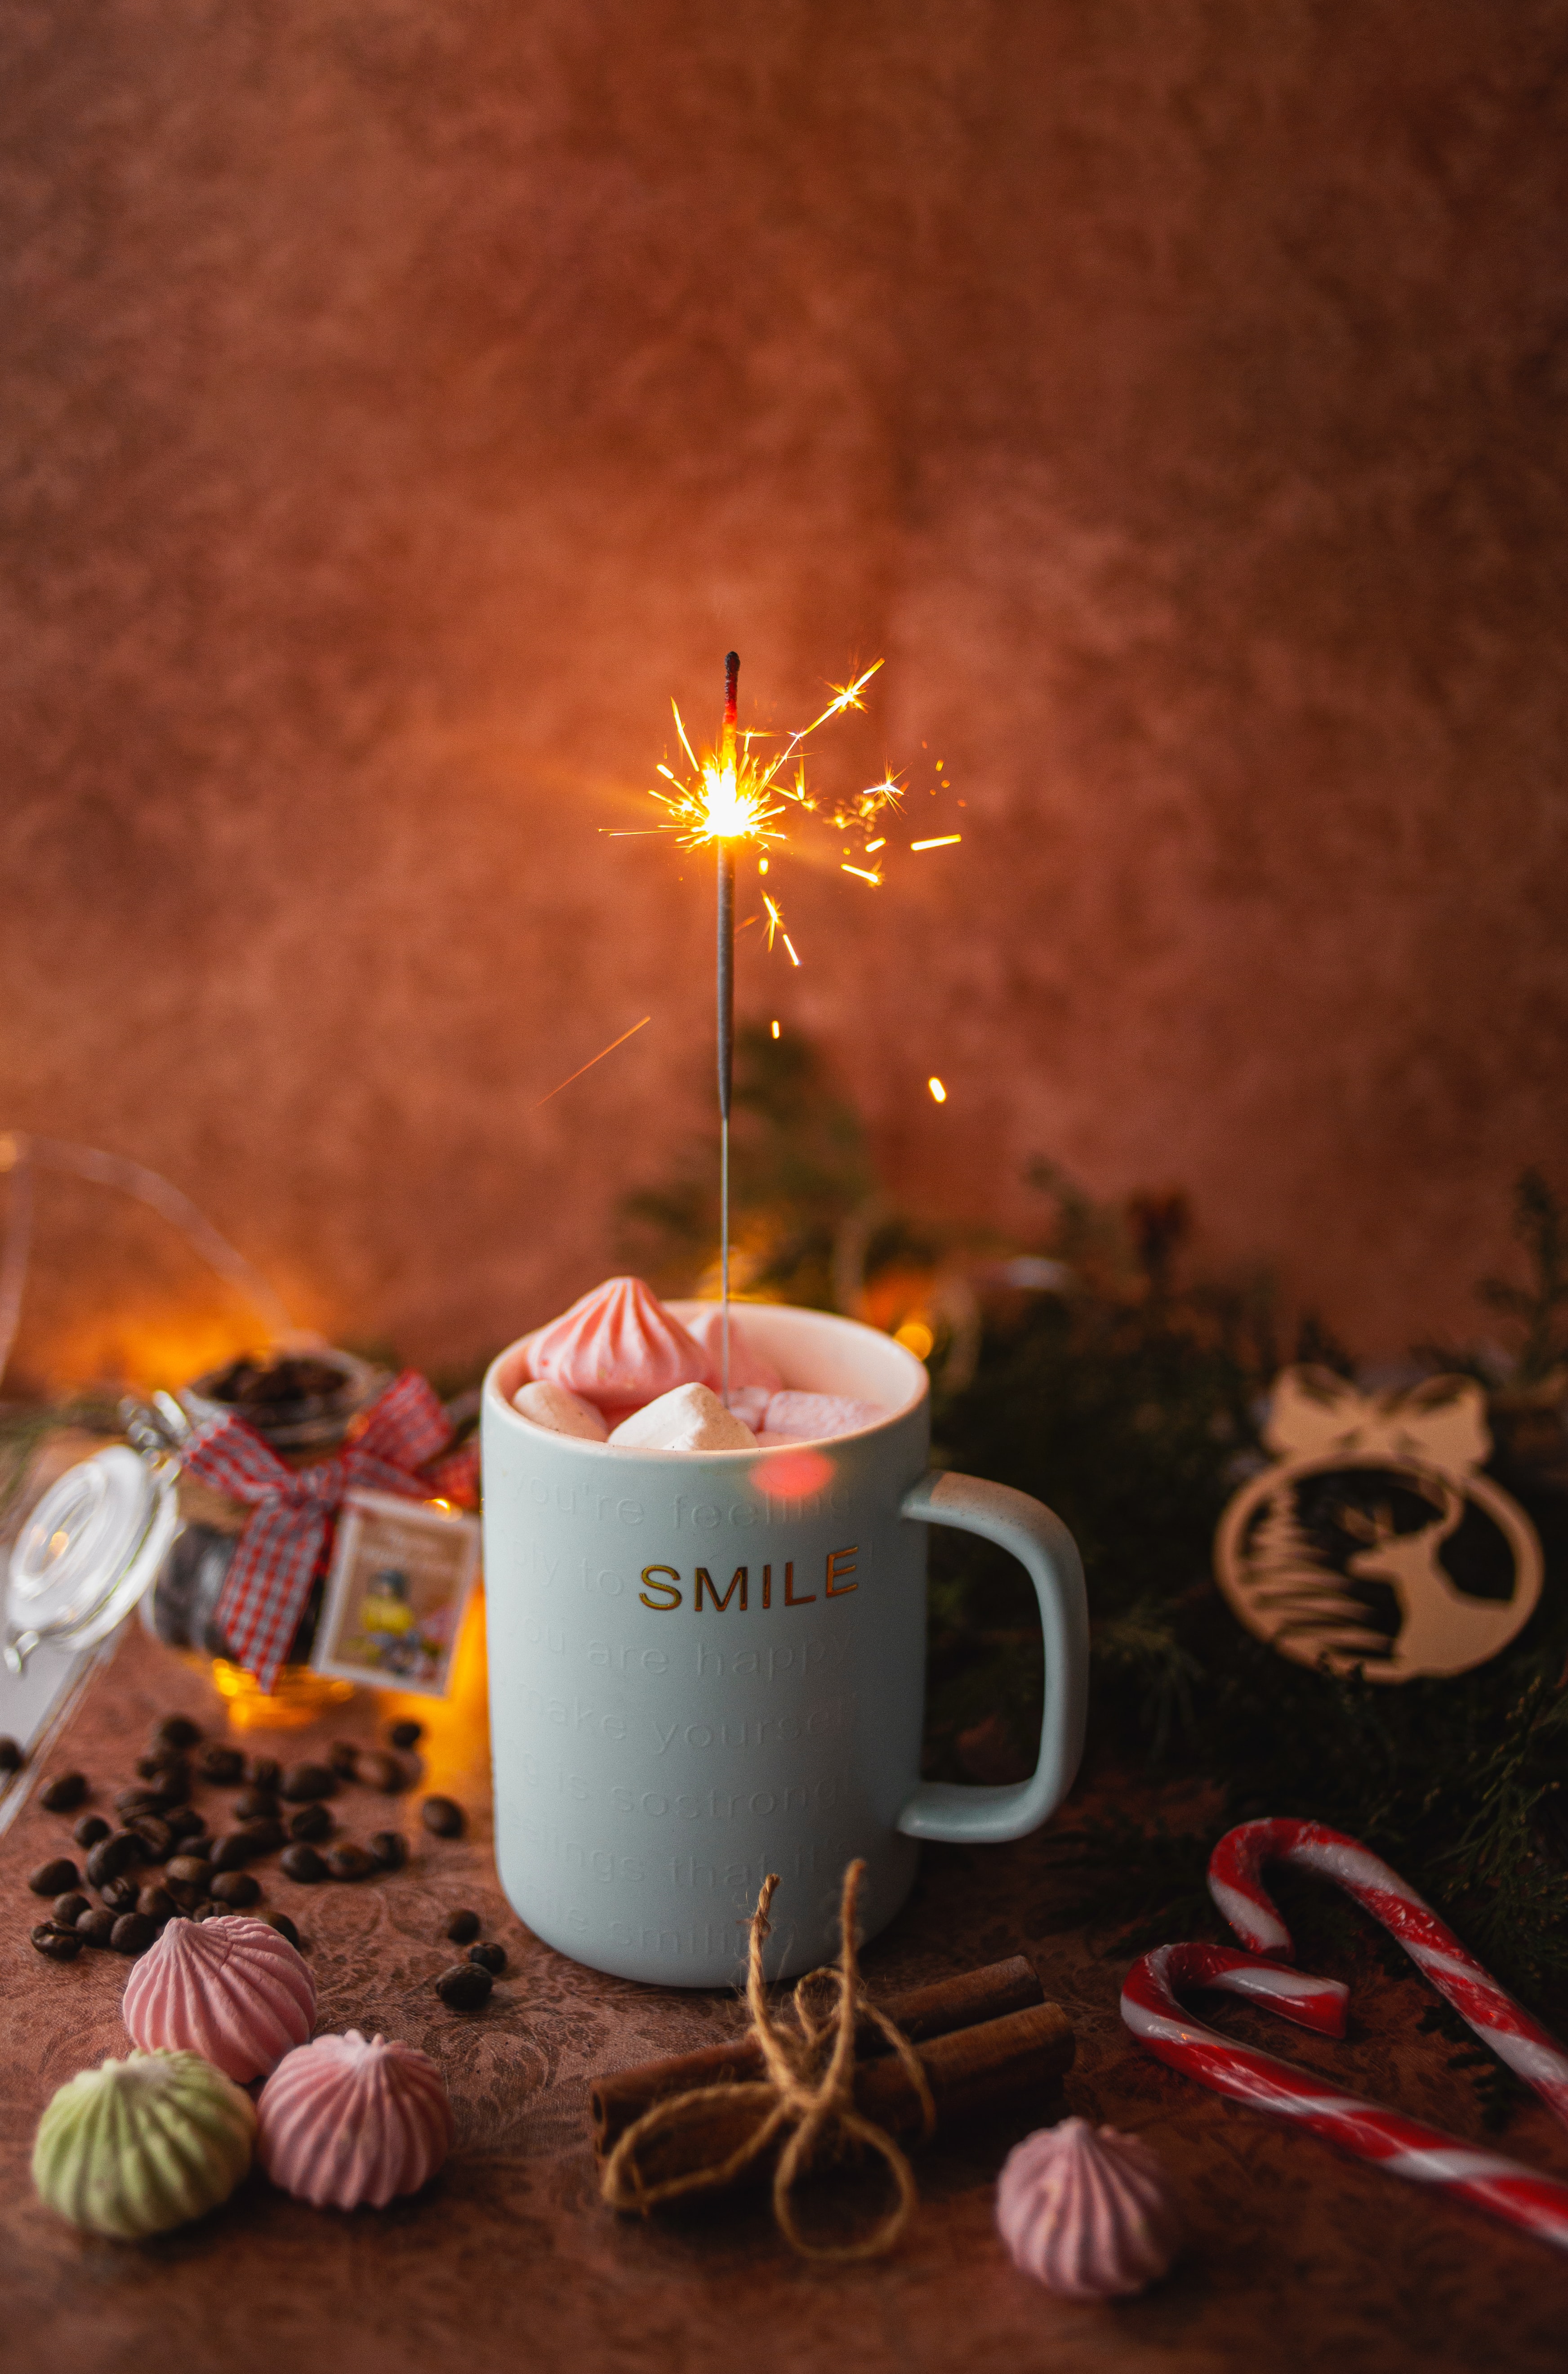 miscellanea, mug, holiday, sparks, cup, miscellaneous, marshmallow, bengal lights, sparklers, zephyr HD wallpaper